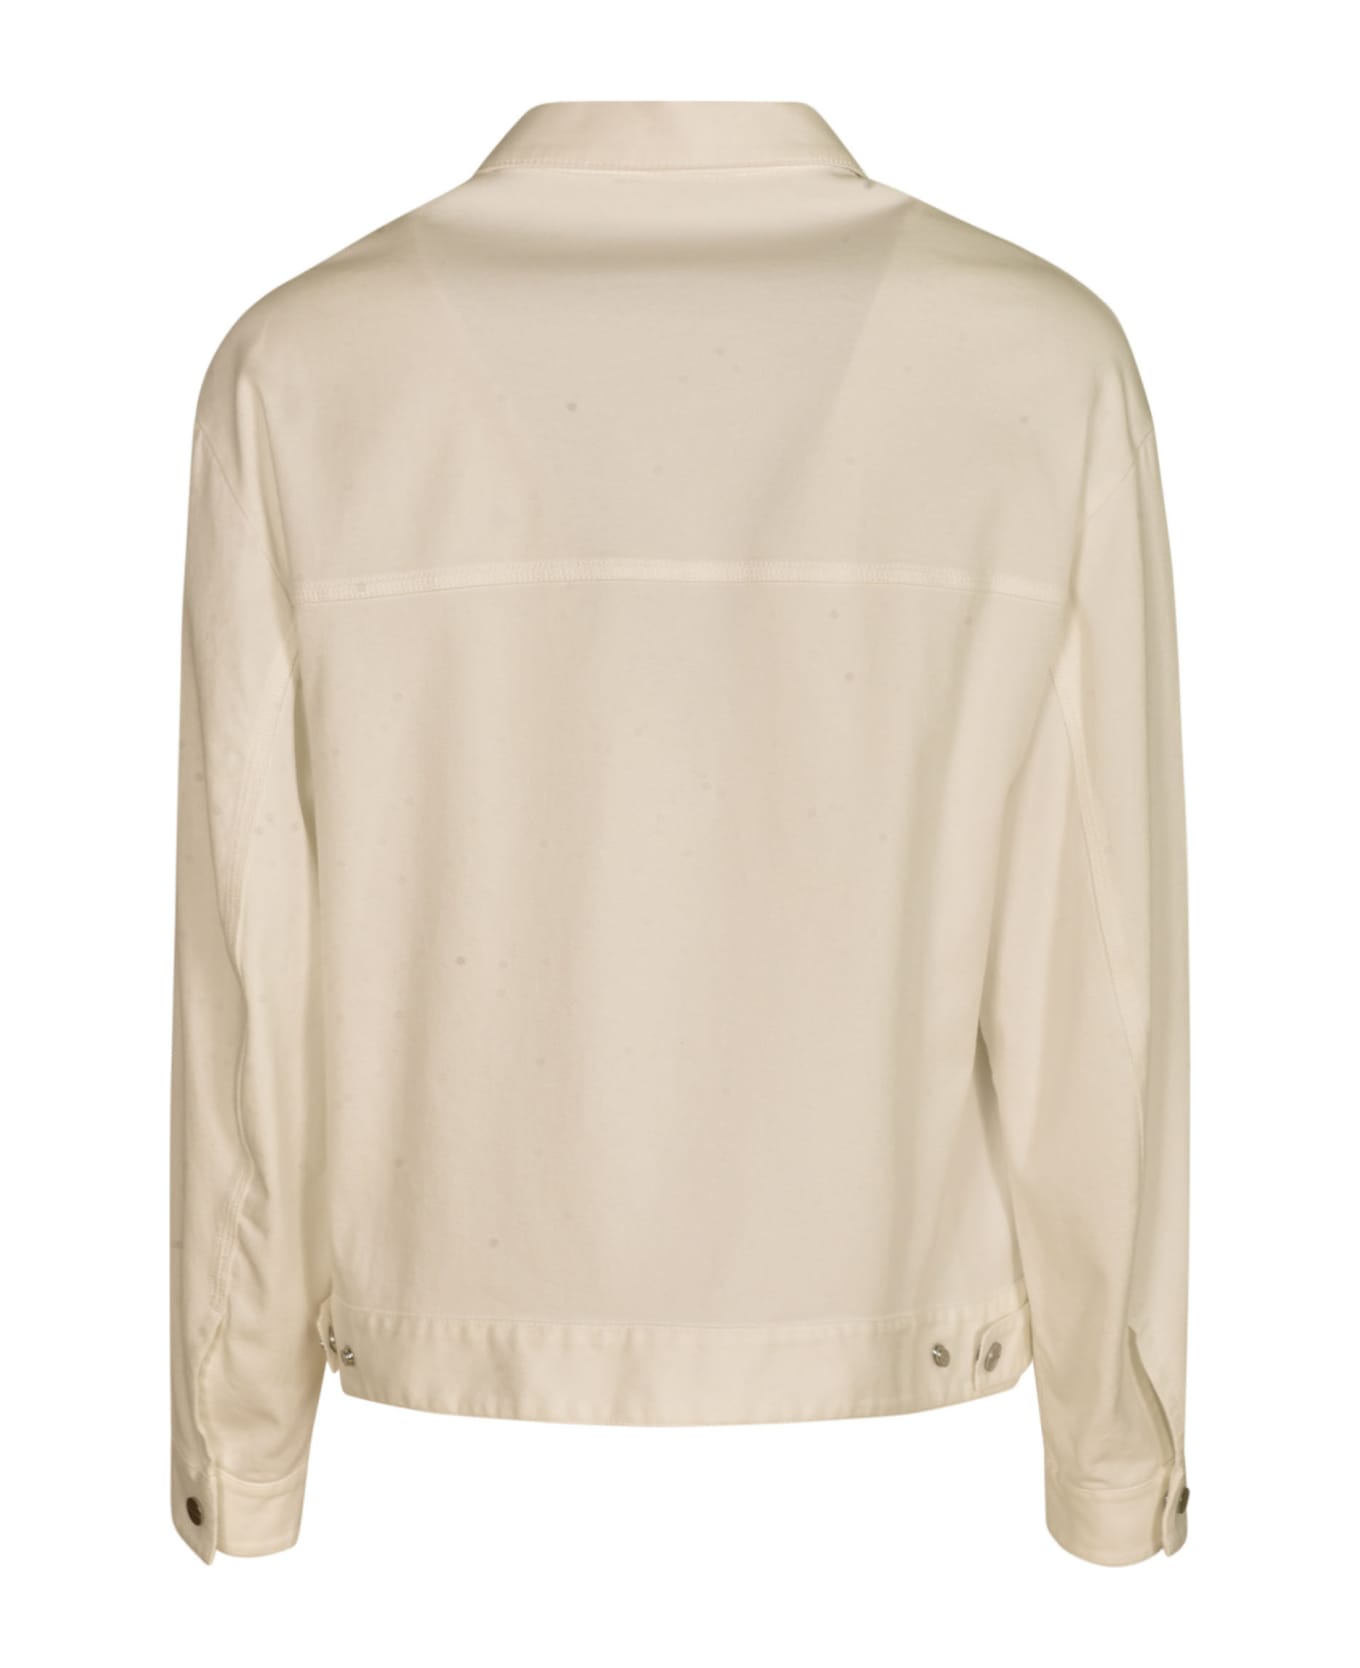 Giorgio Armani Patched Pocket Buttoned Shirt - White